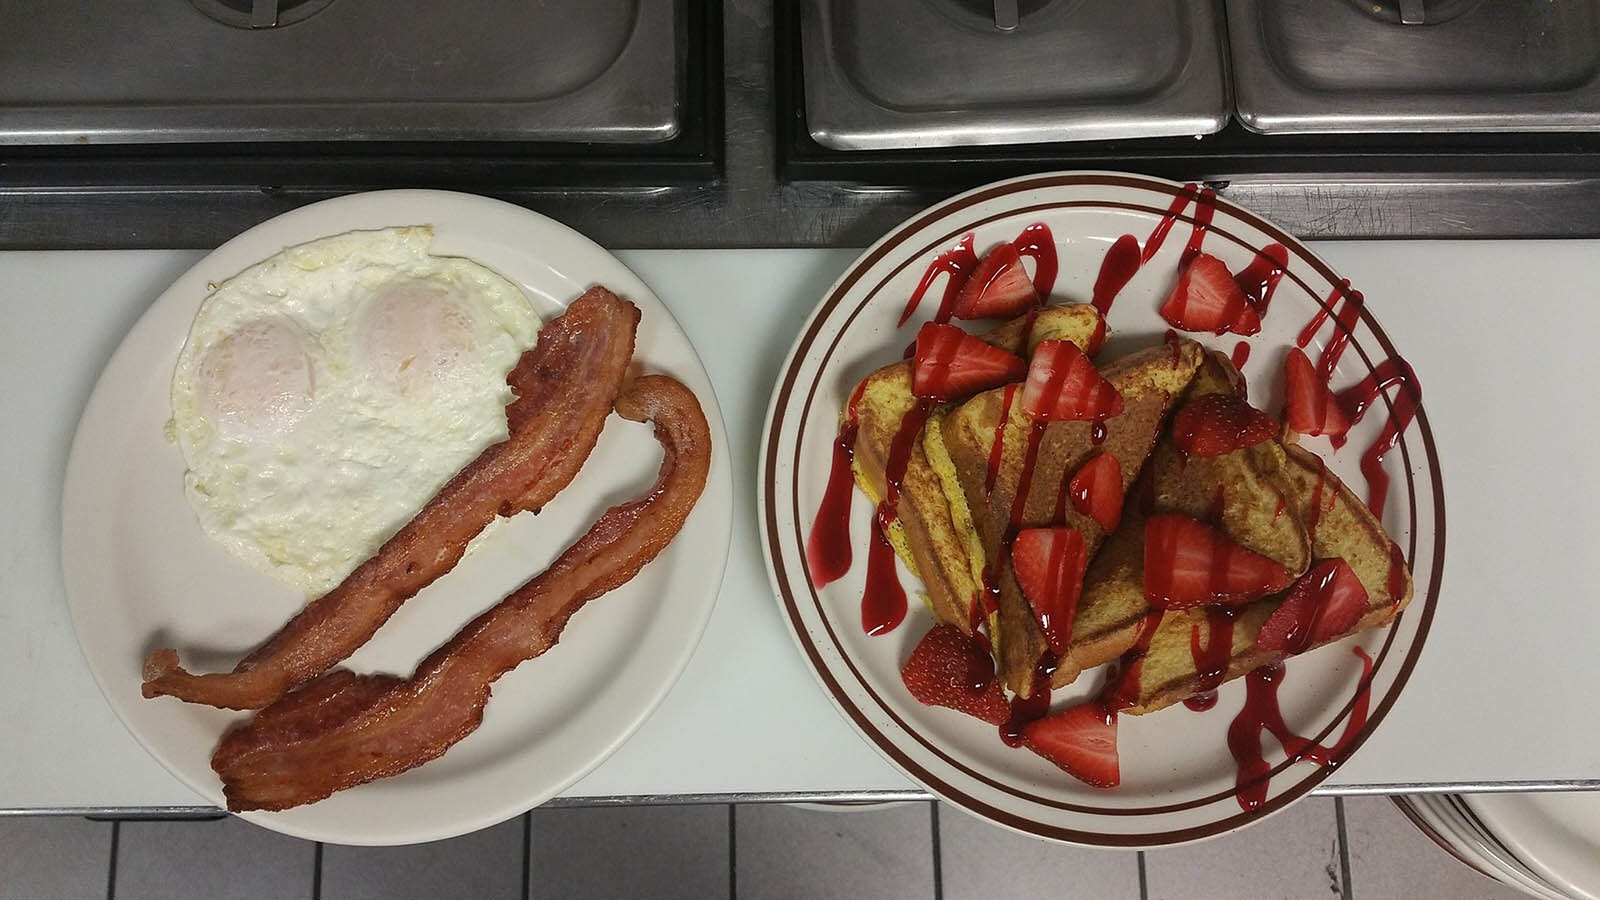 Eggs over easy with bacon and strawberry French toast.